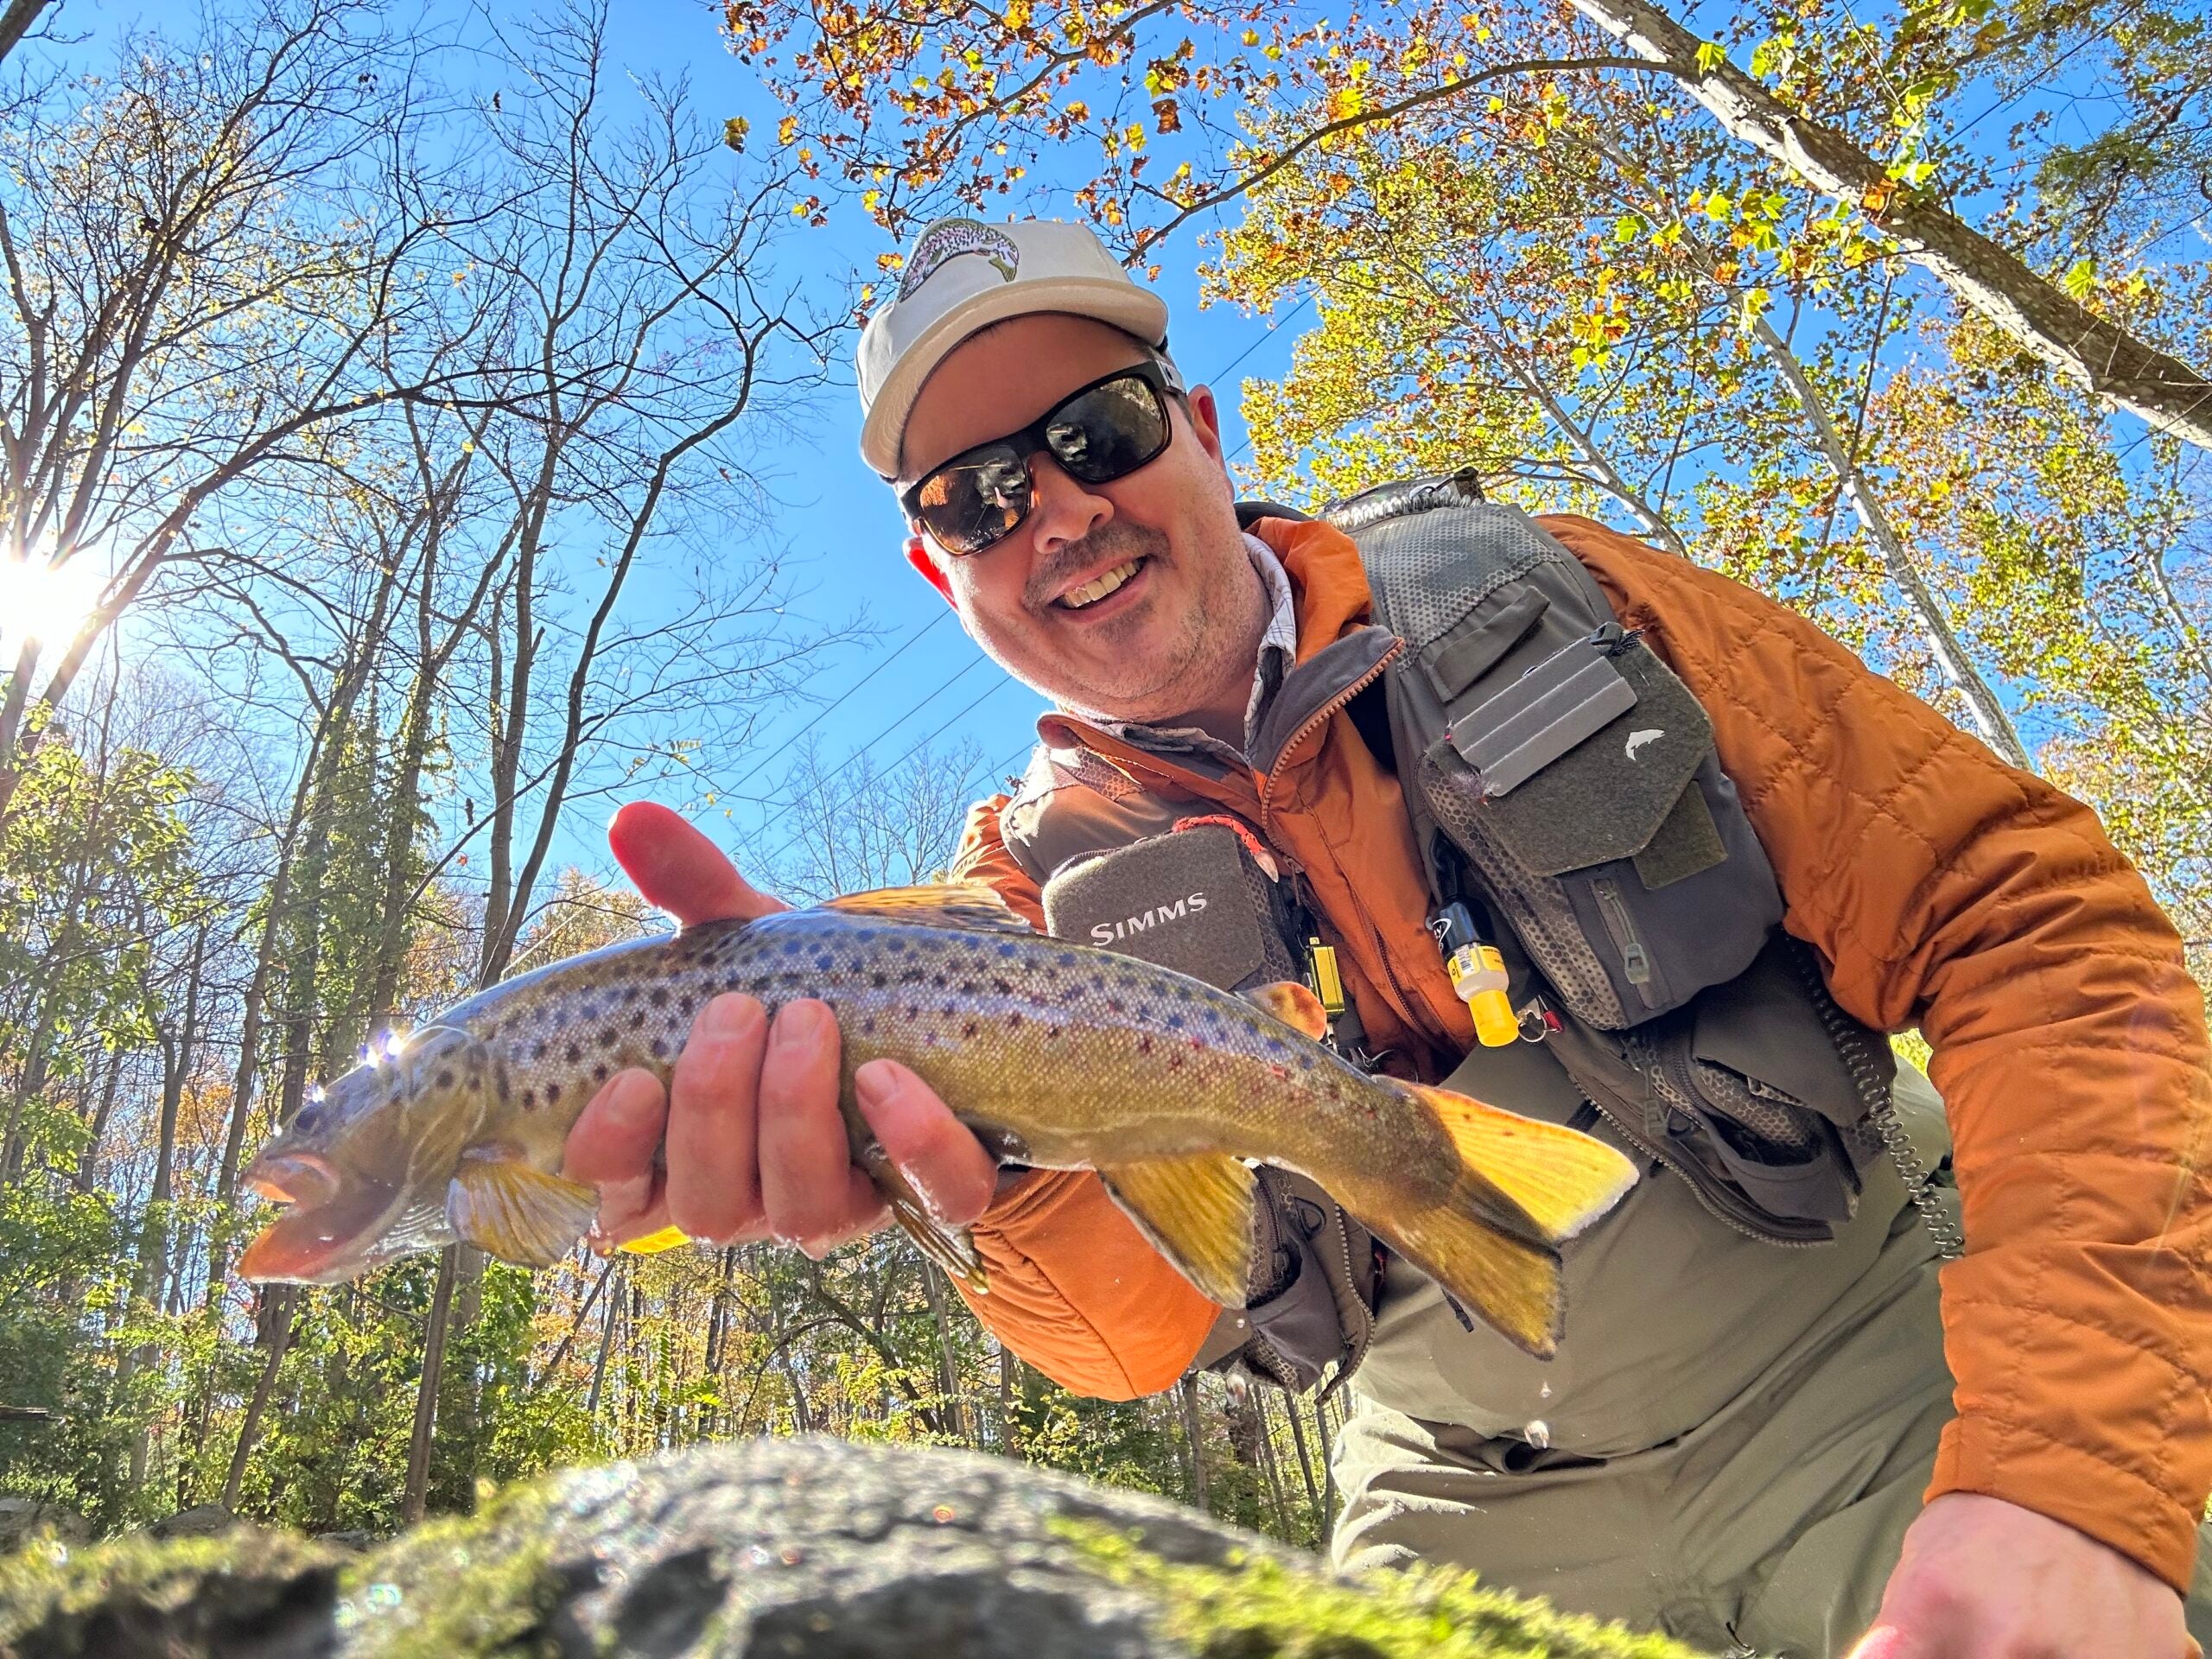 A fly fisherman in an orange jacket and fishing vest holds a brown trout